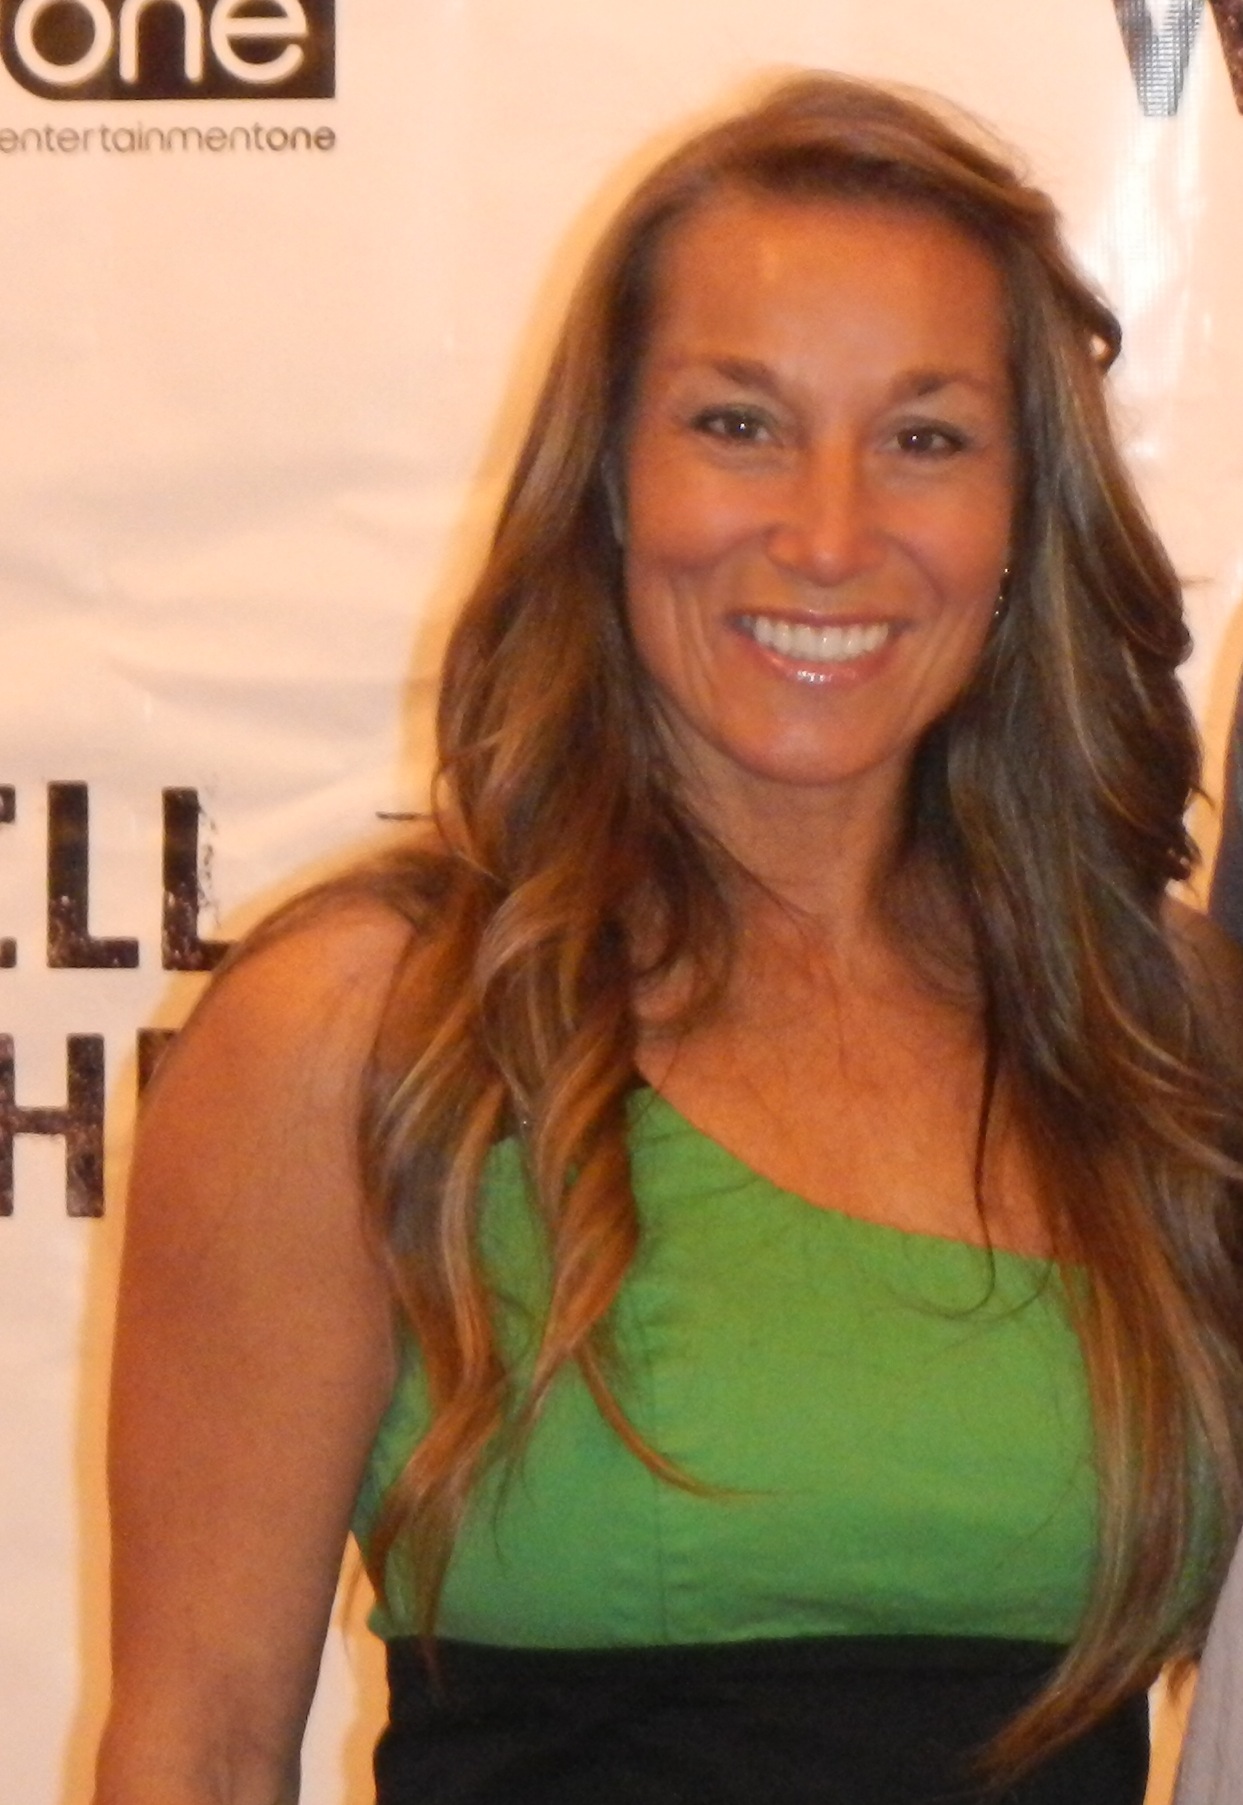 Wendy Lumby at the Hell on Wheels premiere (2015)